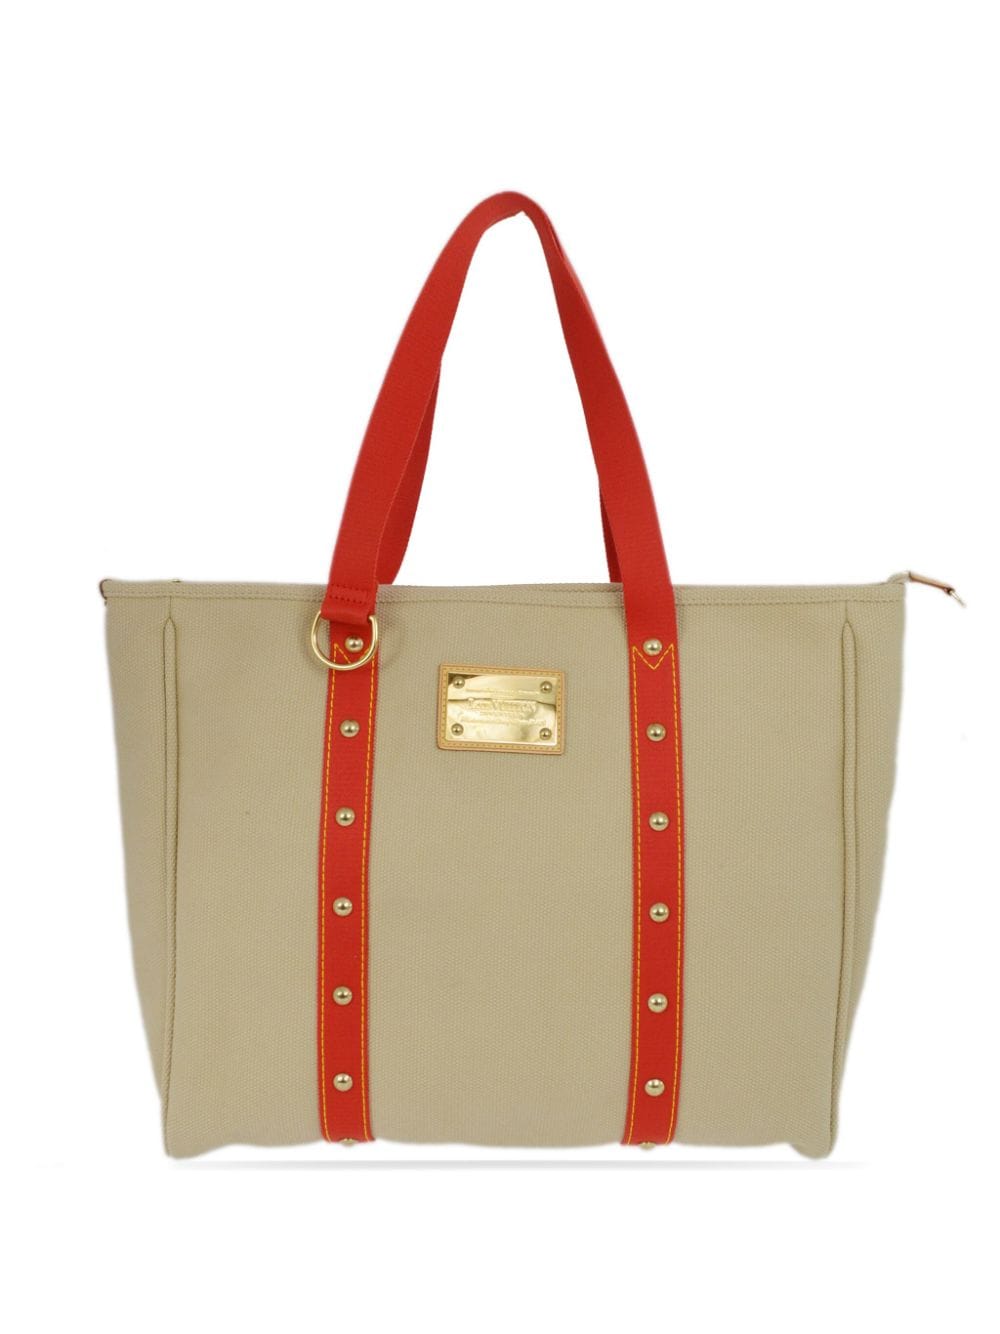 Pre-owned Louis Vuitton 2005 Antigua Cabas Gm Tote Bag In Neutrals